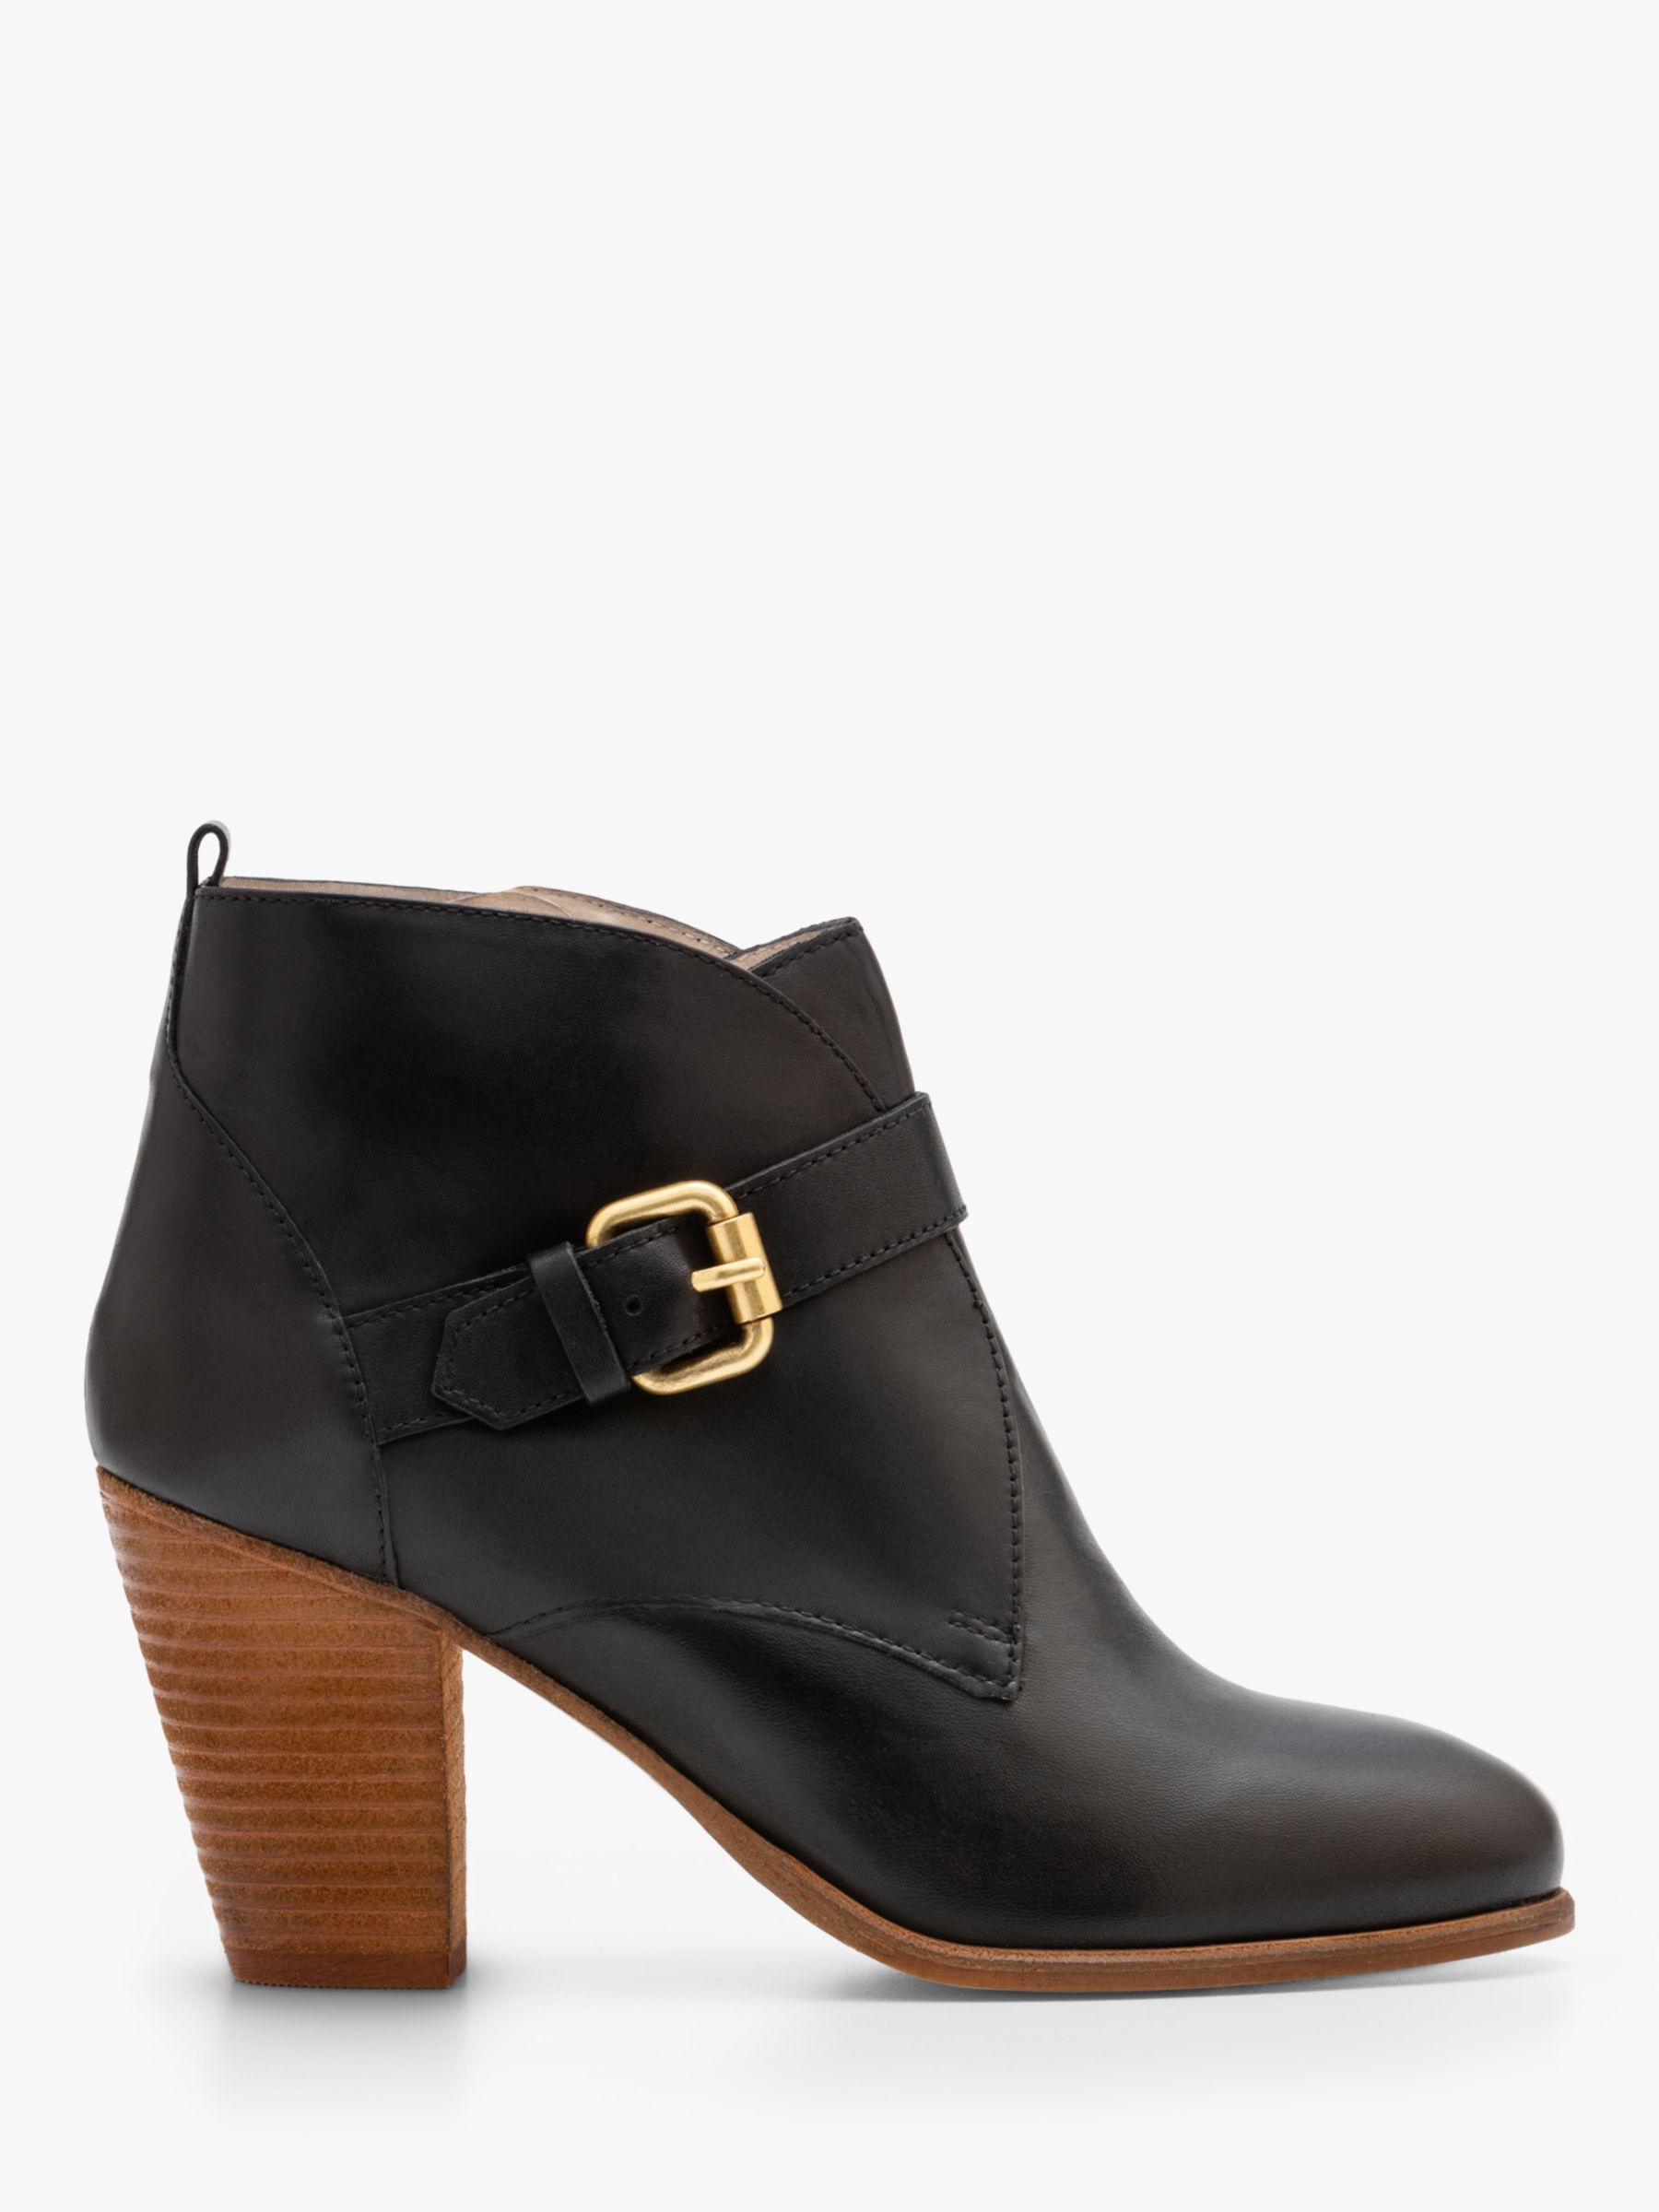 Boden Carlisle Leather Heeled Ankle Boots, Black at John Lewis & Partners